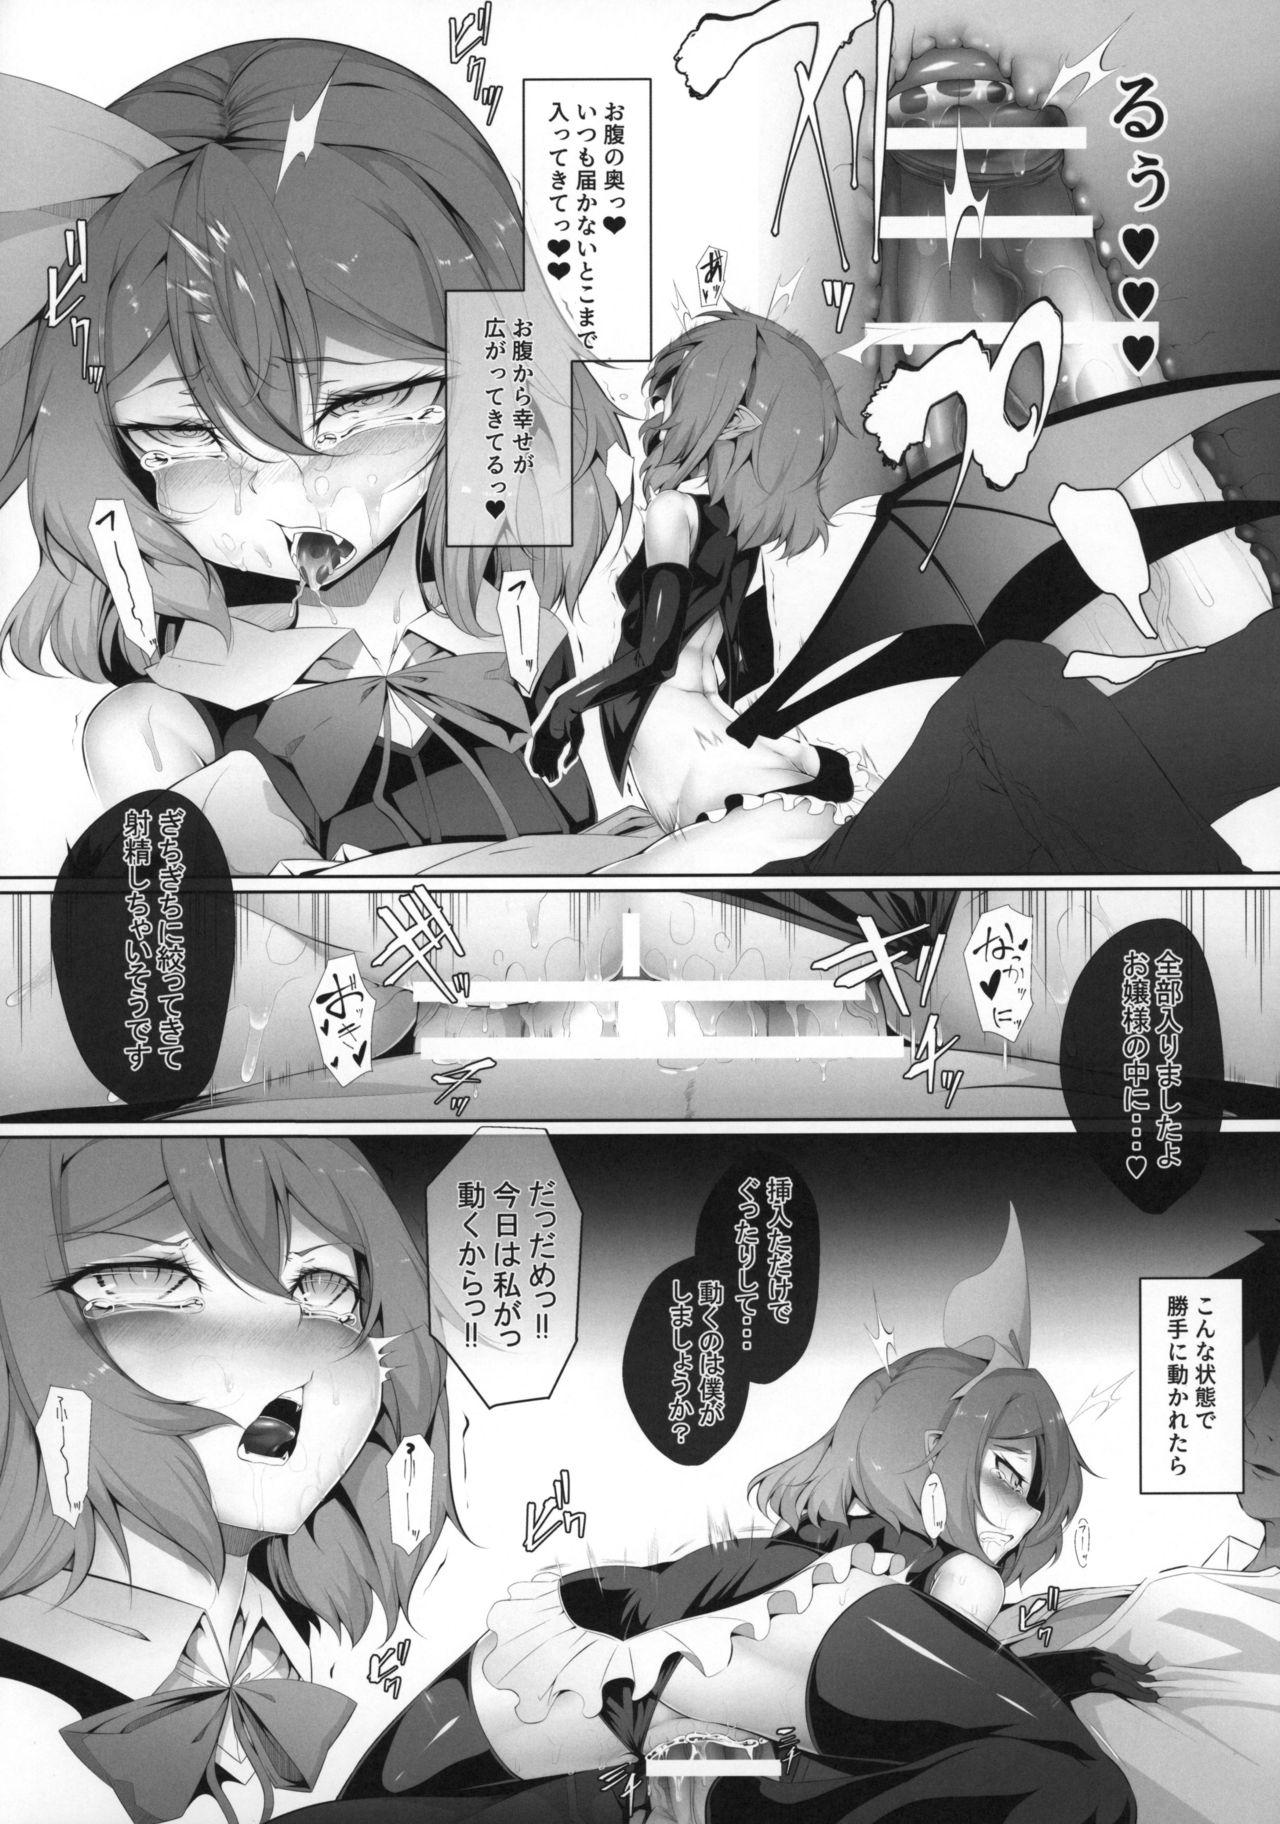 Argentino M.P. vol. 19 - Touhou project Couples - Page 10